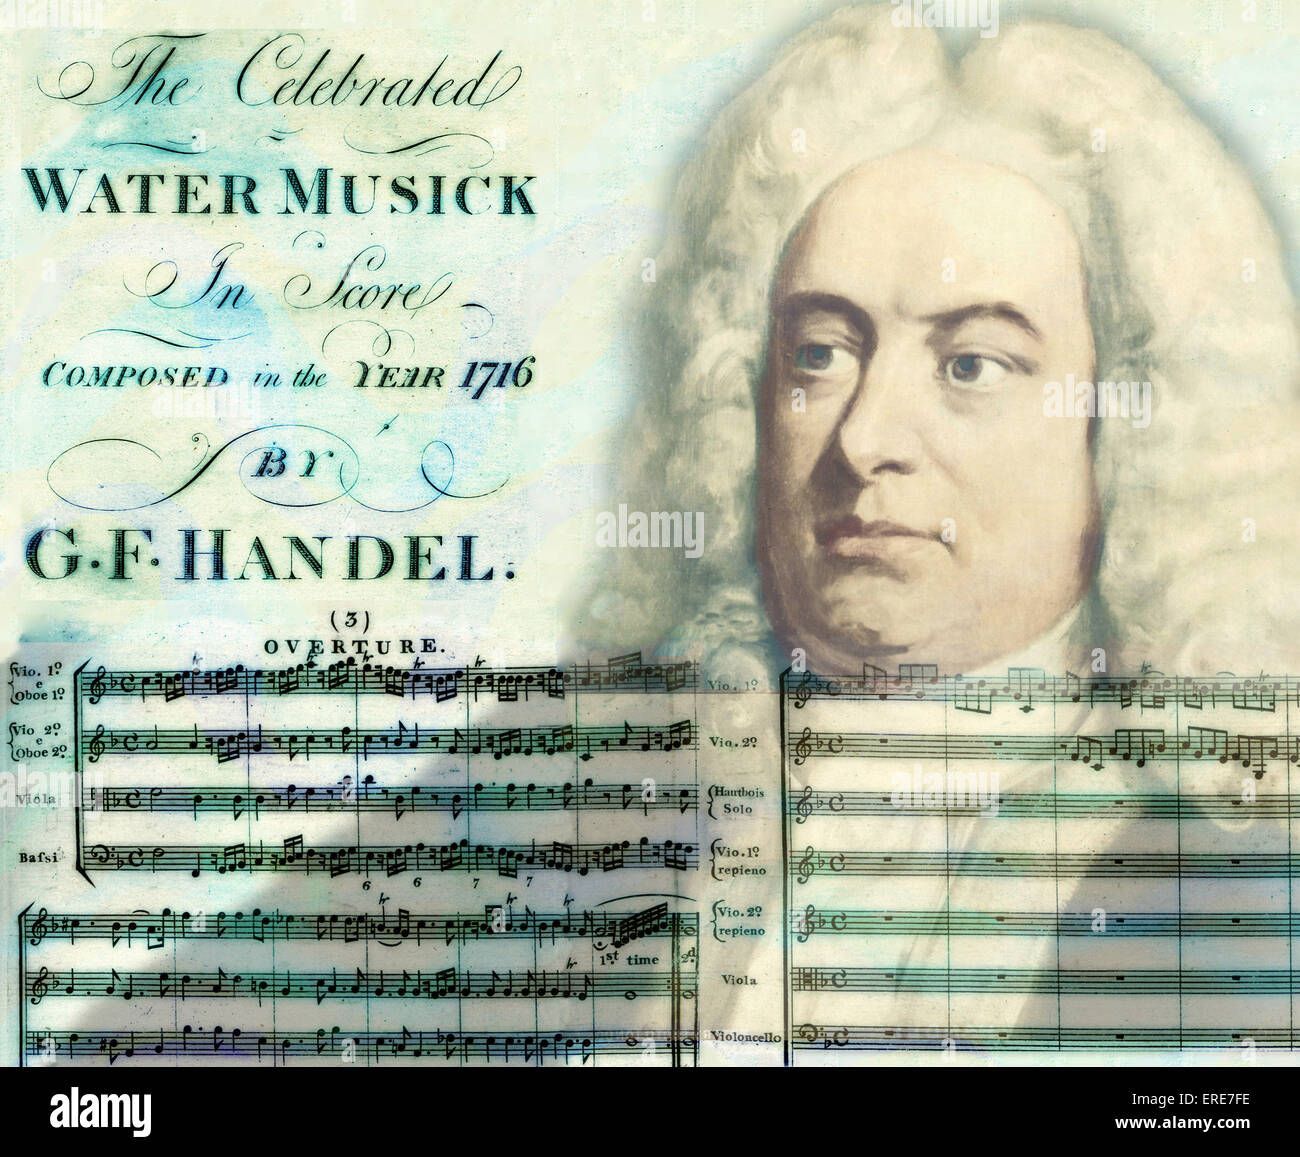 HANDEL, George Frideric collageor graphic compilation (cover ready to go). German-English composer, 23 February 1685 - 14 April 1759 Stock Photo